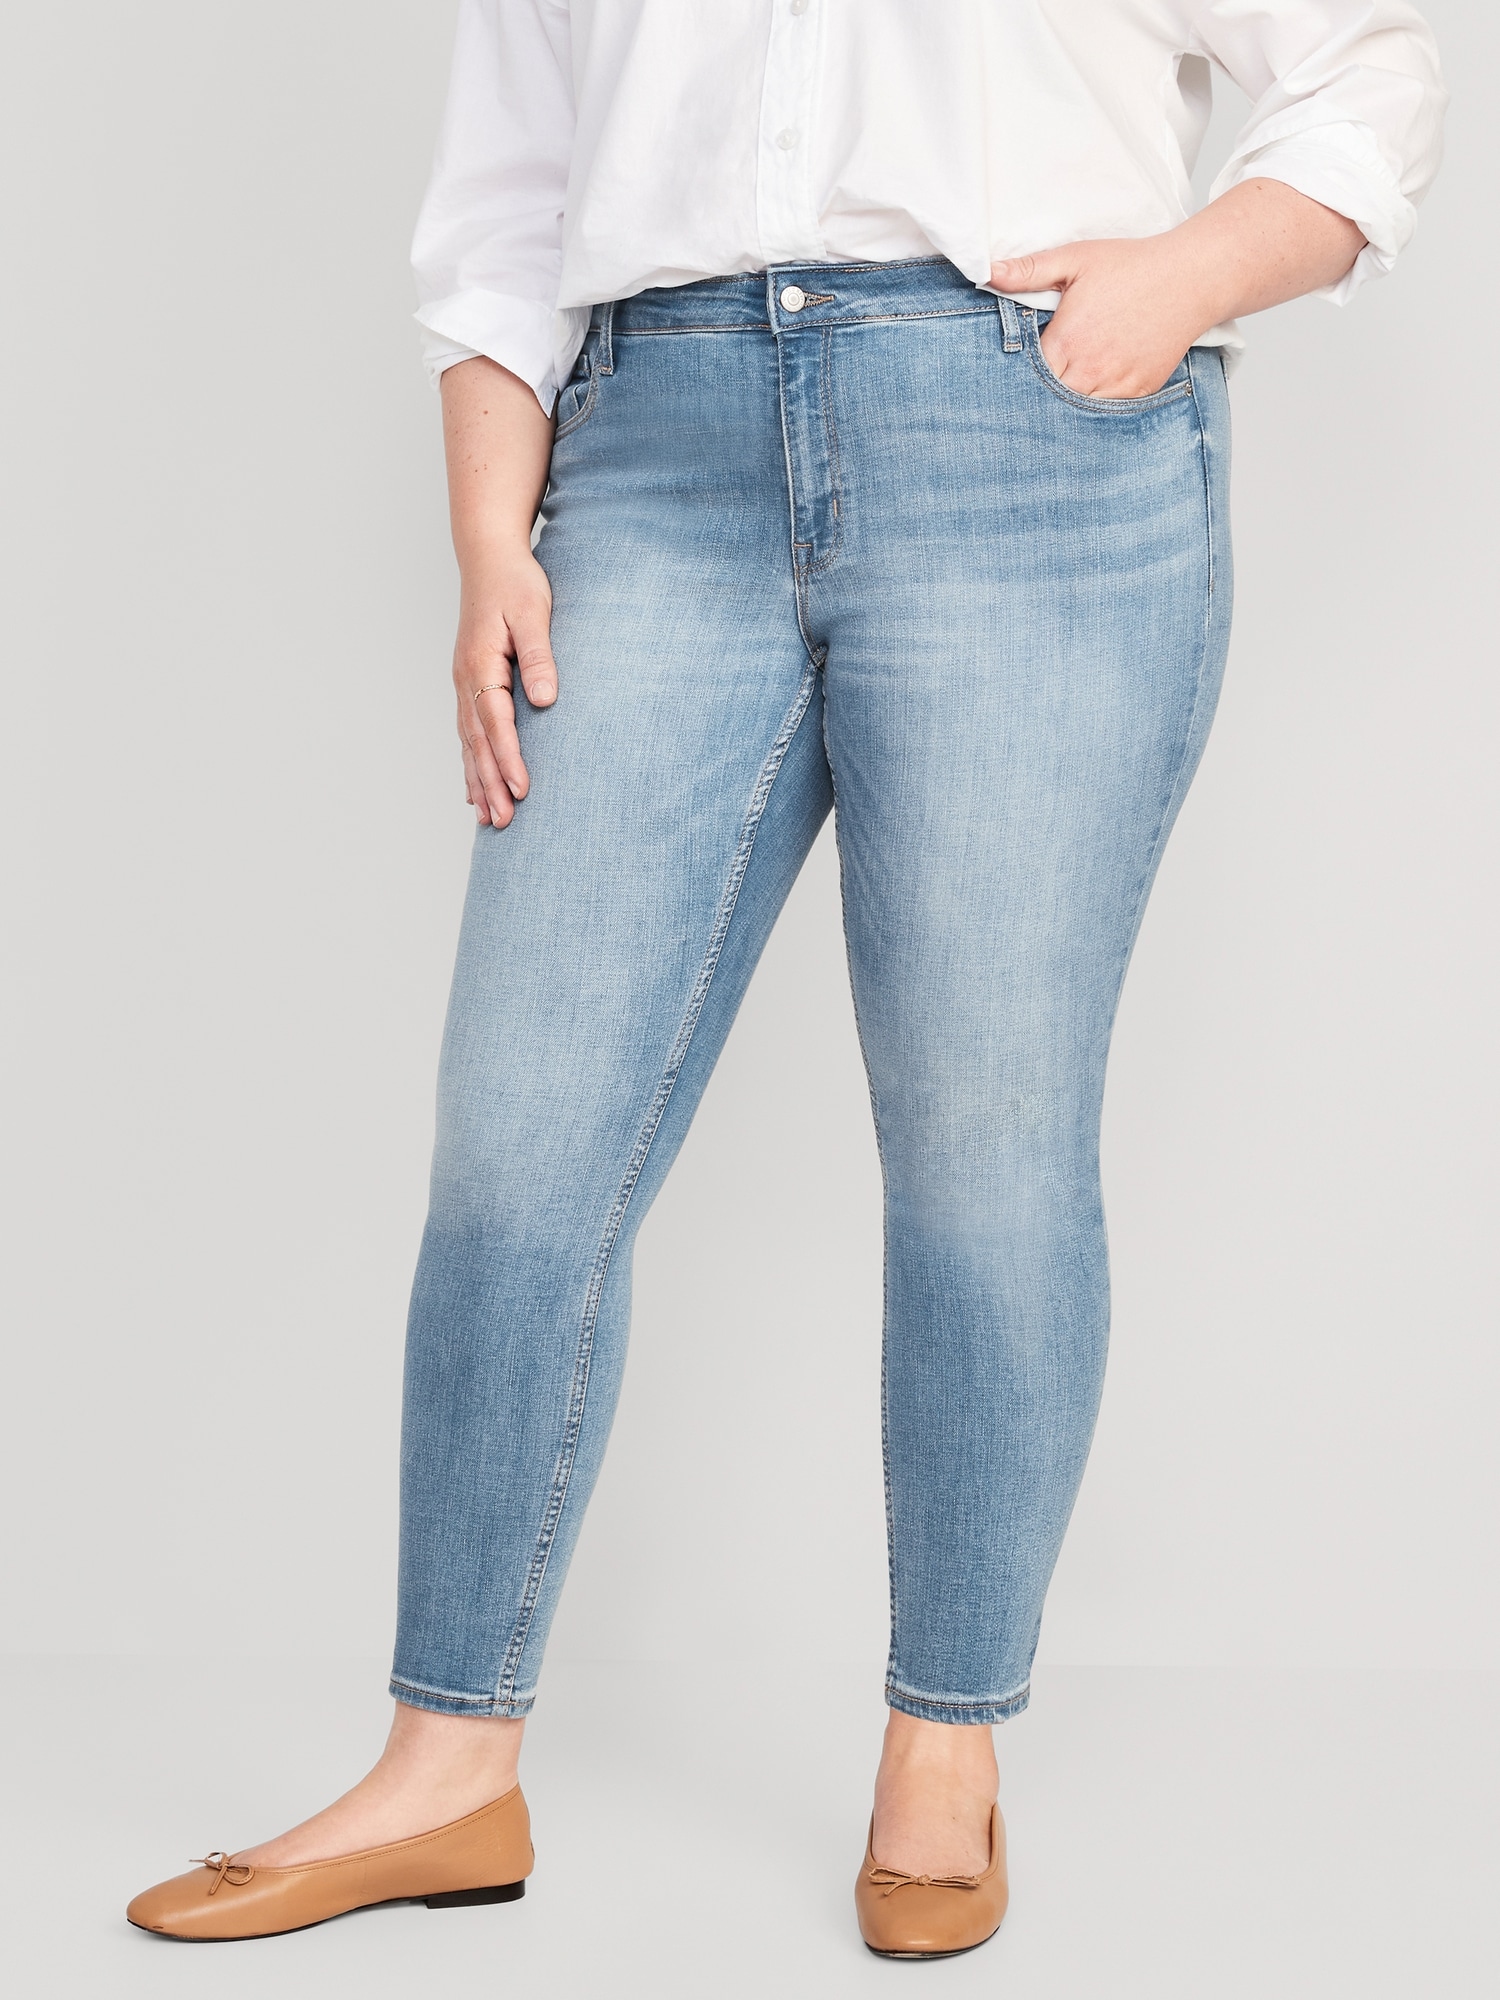 Jeans Skinny By Old Navy Size: 4